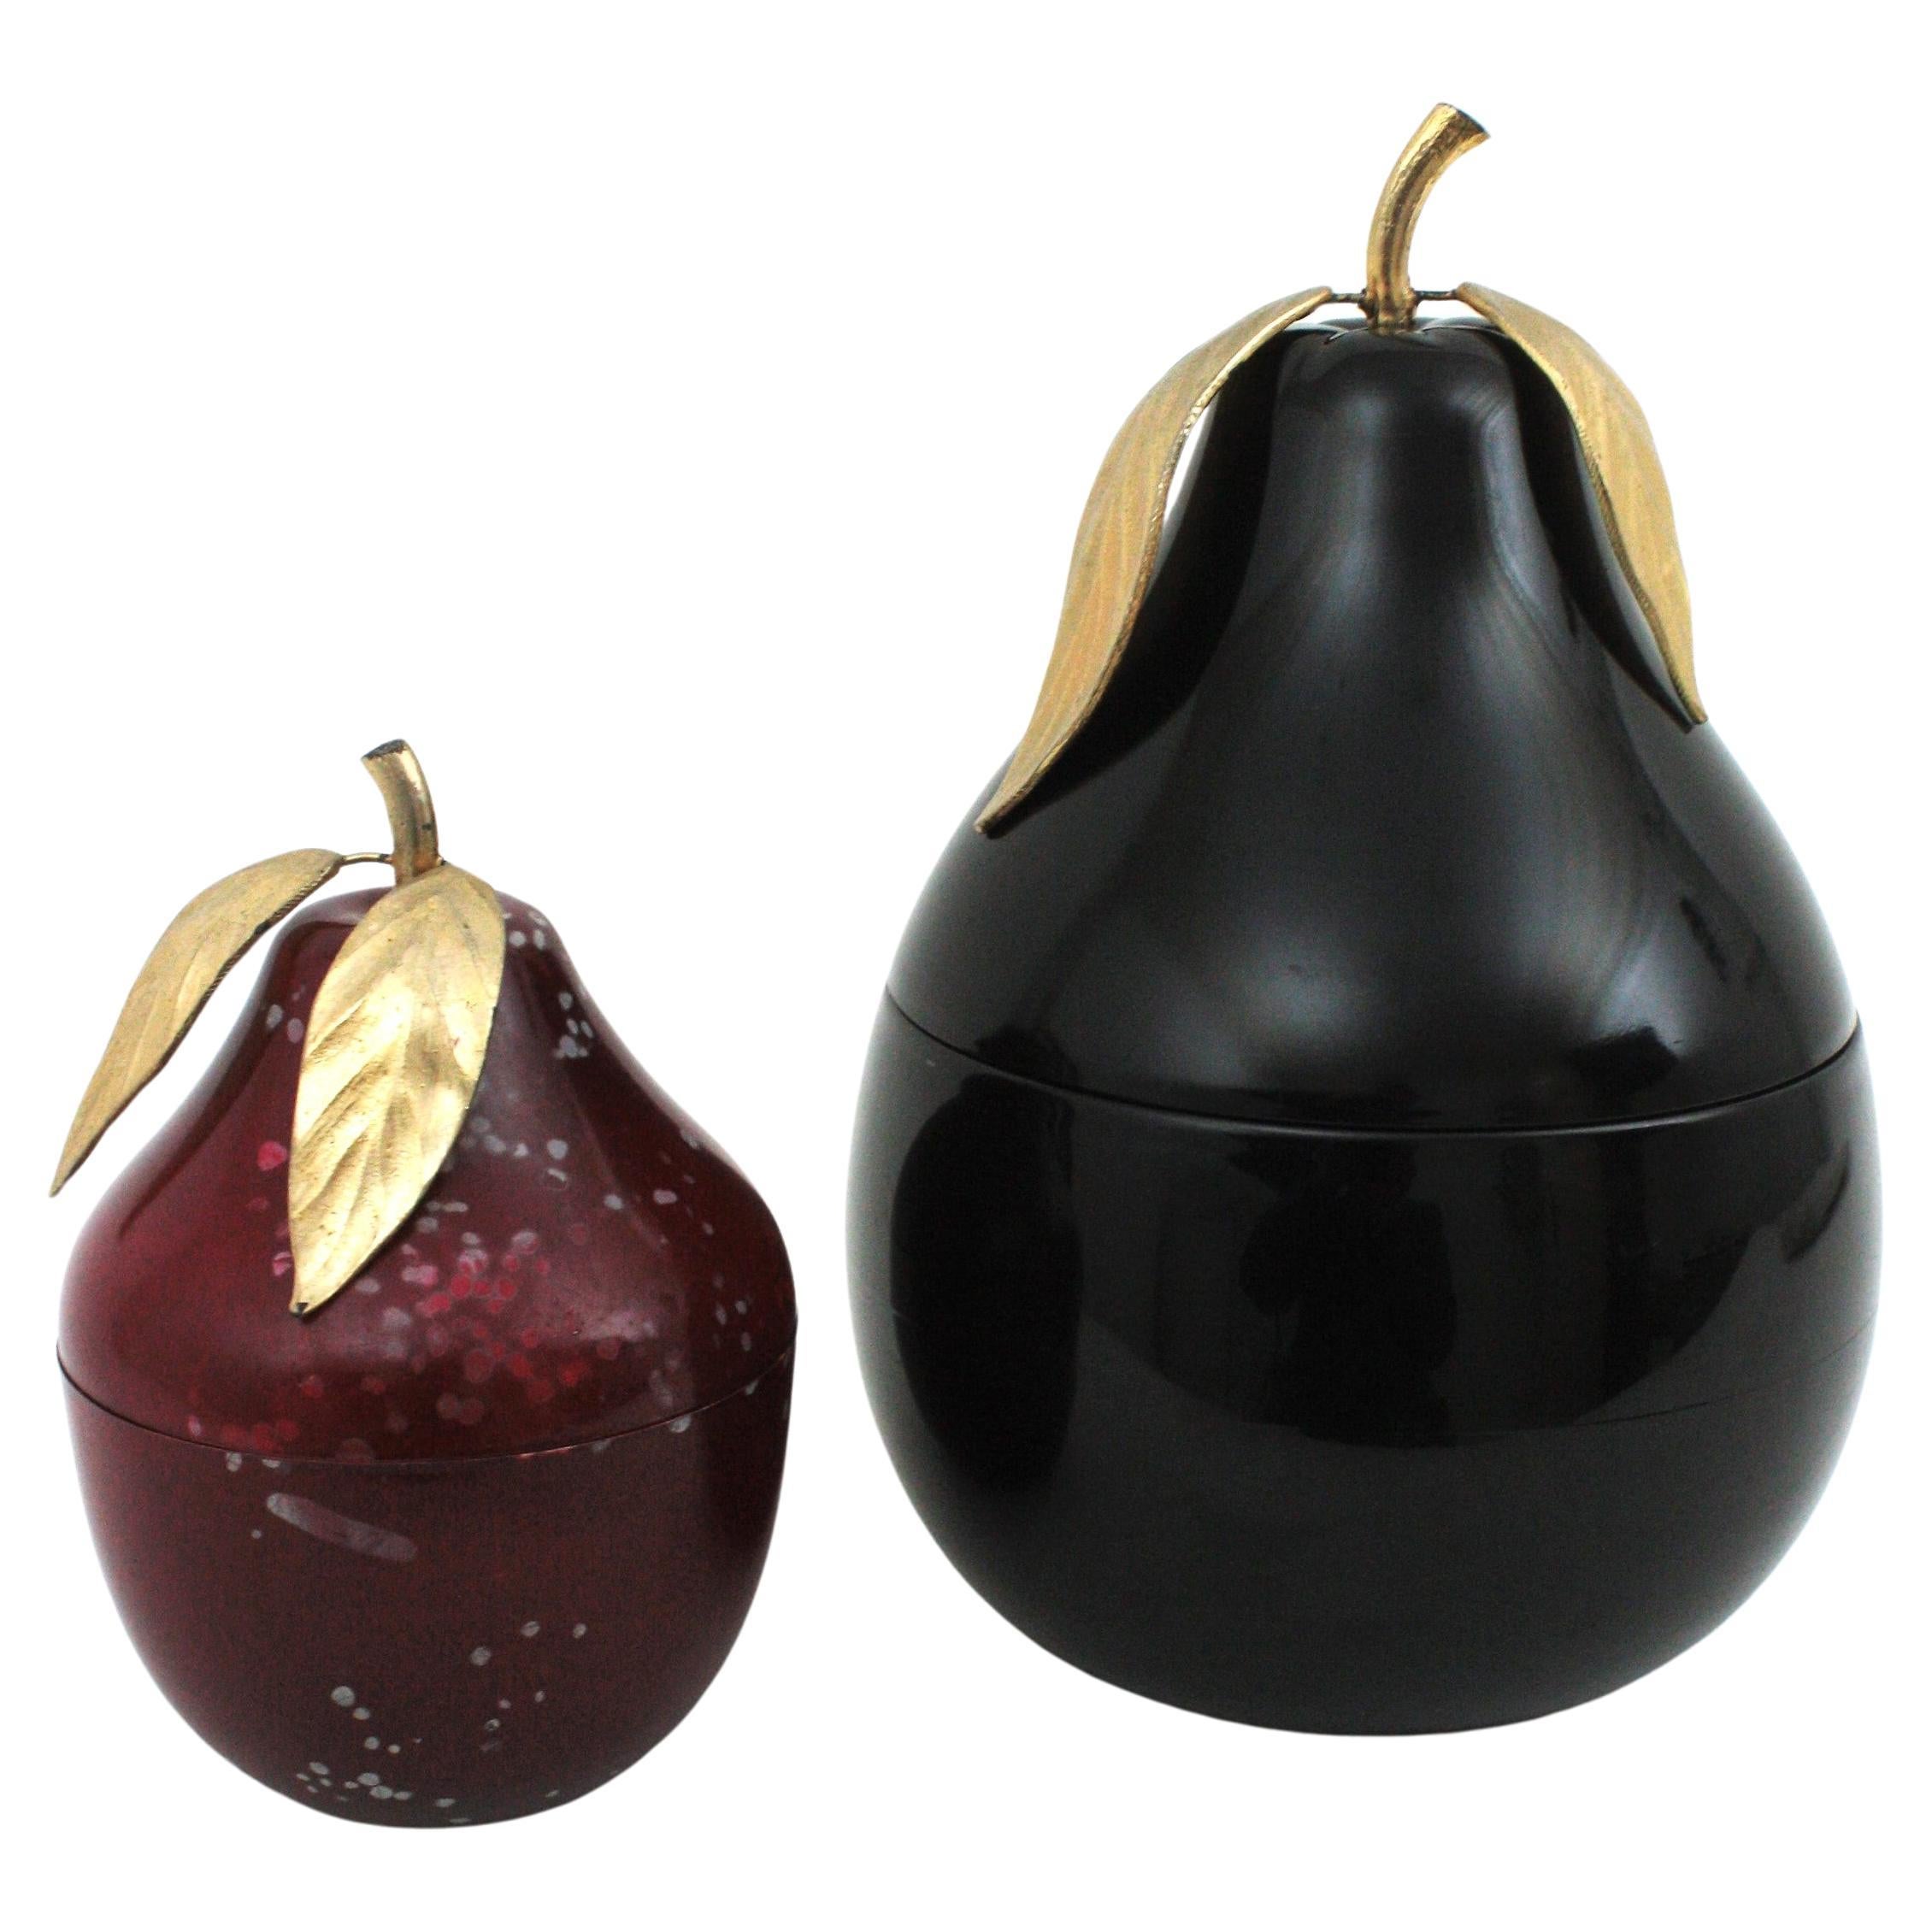 Pair of Pear shaped ice buckets by Hans Turnwald Collection.
1 Large pear ice bucket or champagne cooler in black color
1 small red pear ice bucket
These eye-catching ice buckets in the shape of a pear are luxurious addition to the home bar or just